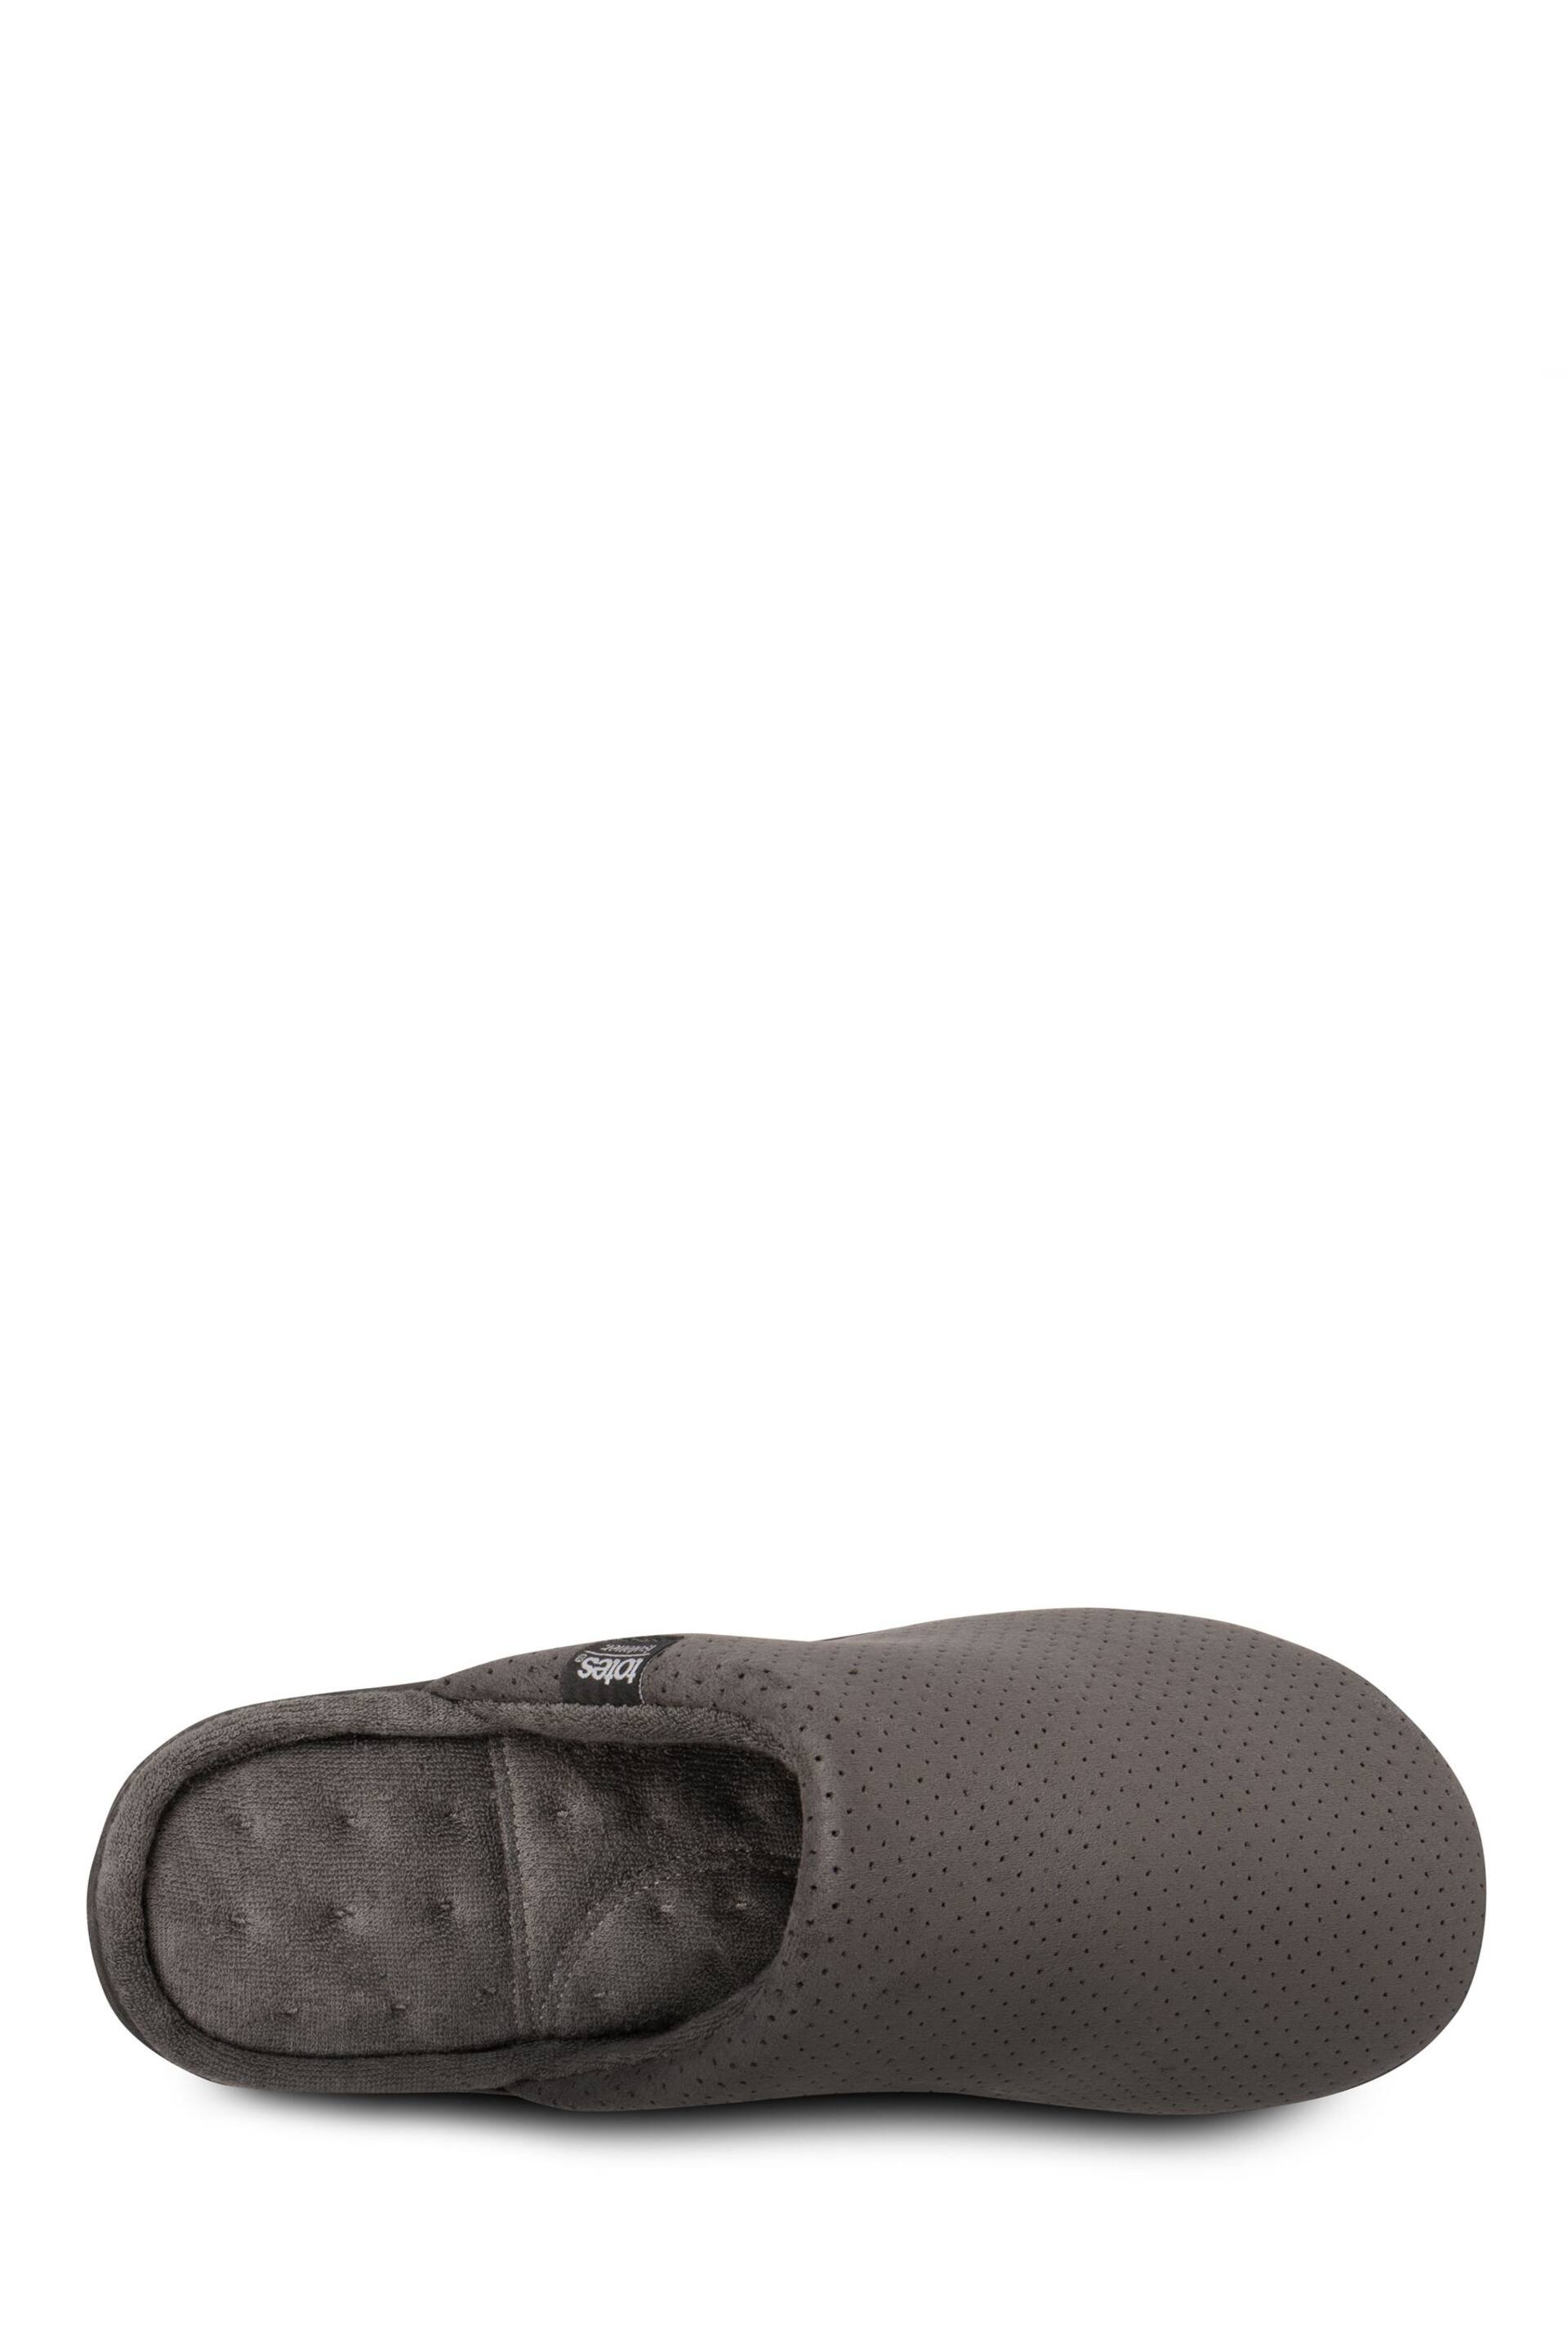 Totes Grey Isotoner Airtex Suedette Mules Slippers - Image 4 of 5